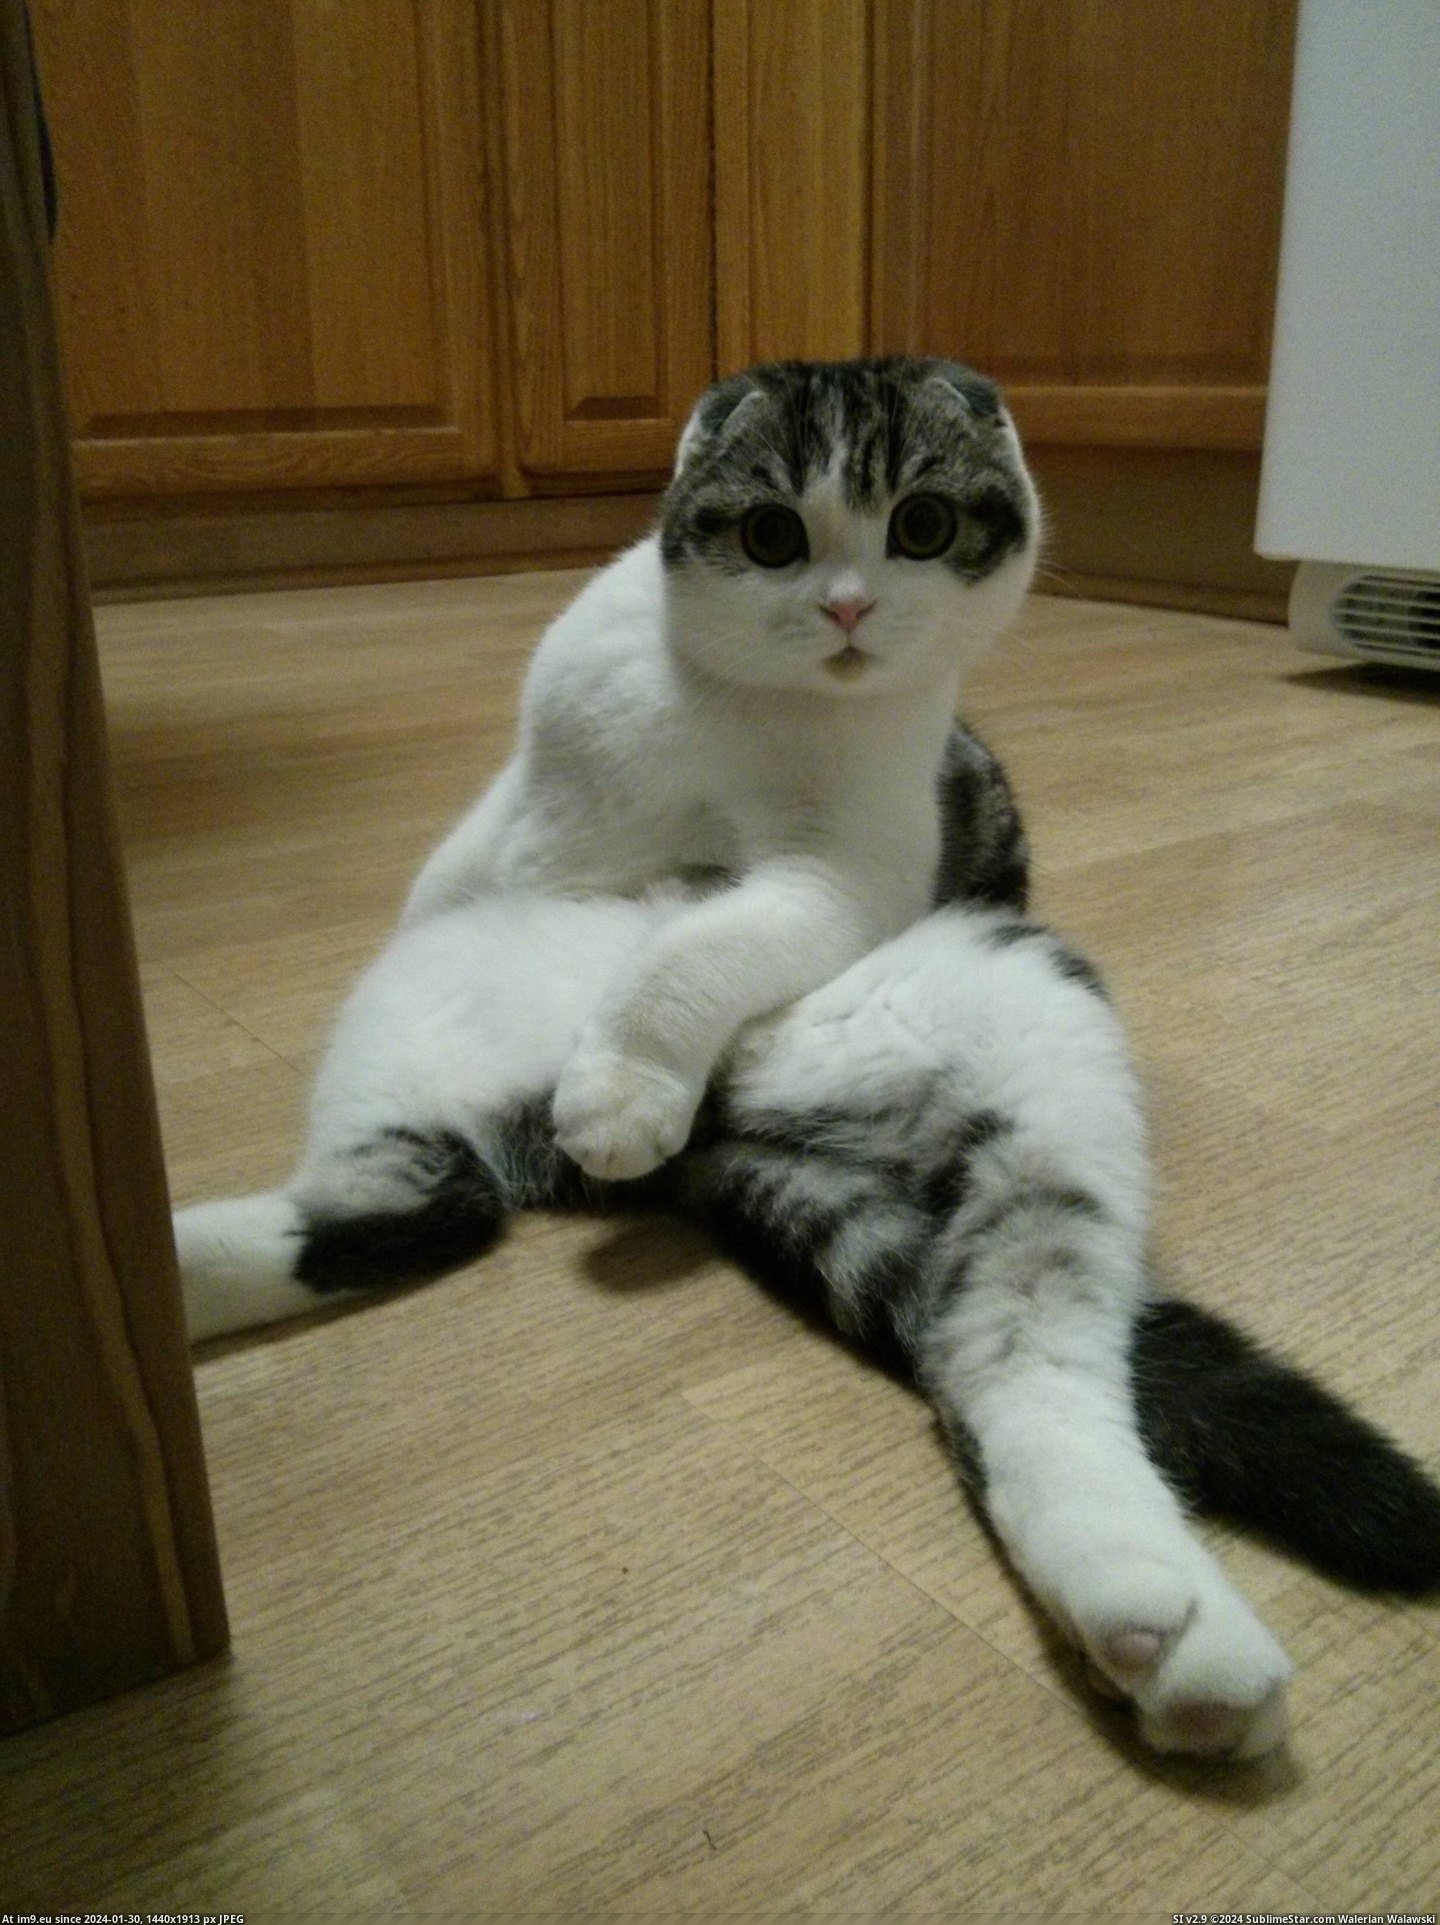 #Butt #Sits #Cat [Aww] My cat always sits on his butt. 4 Pic. (Image of album My r/AWW favs))